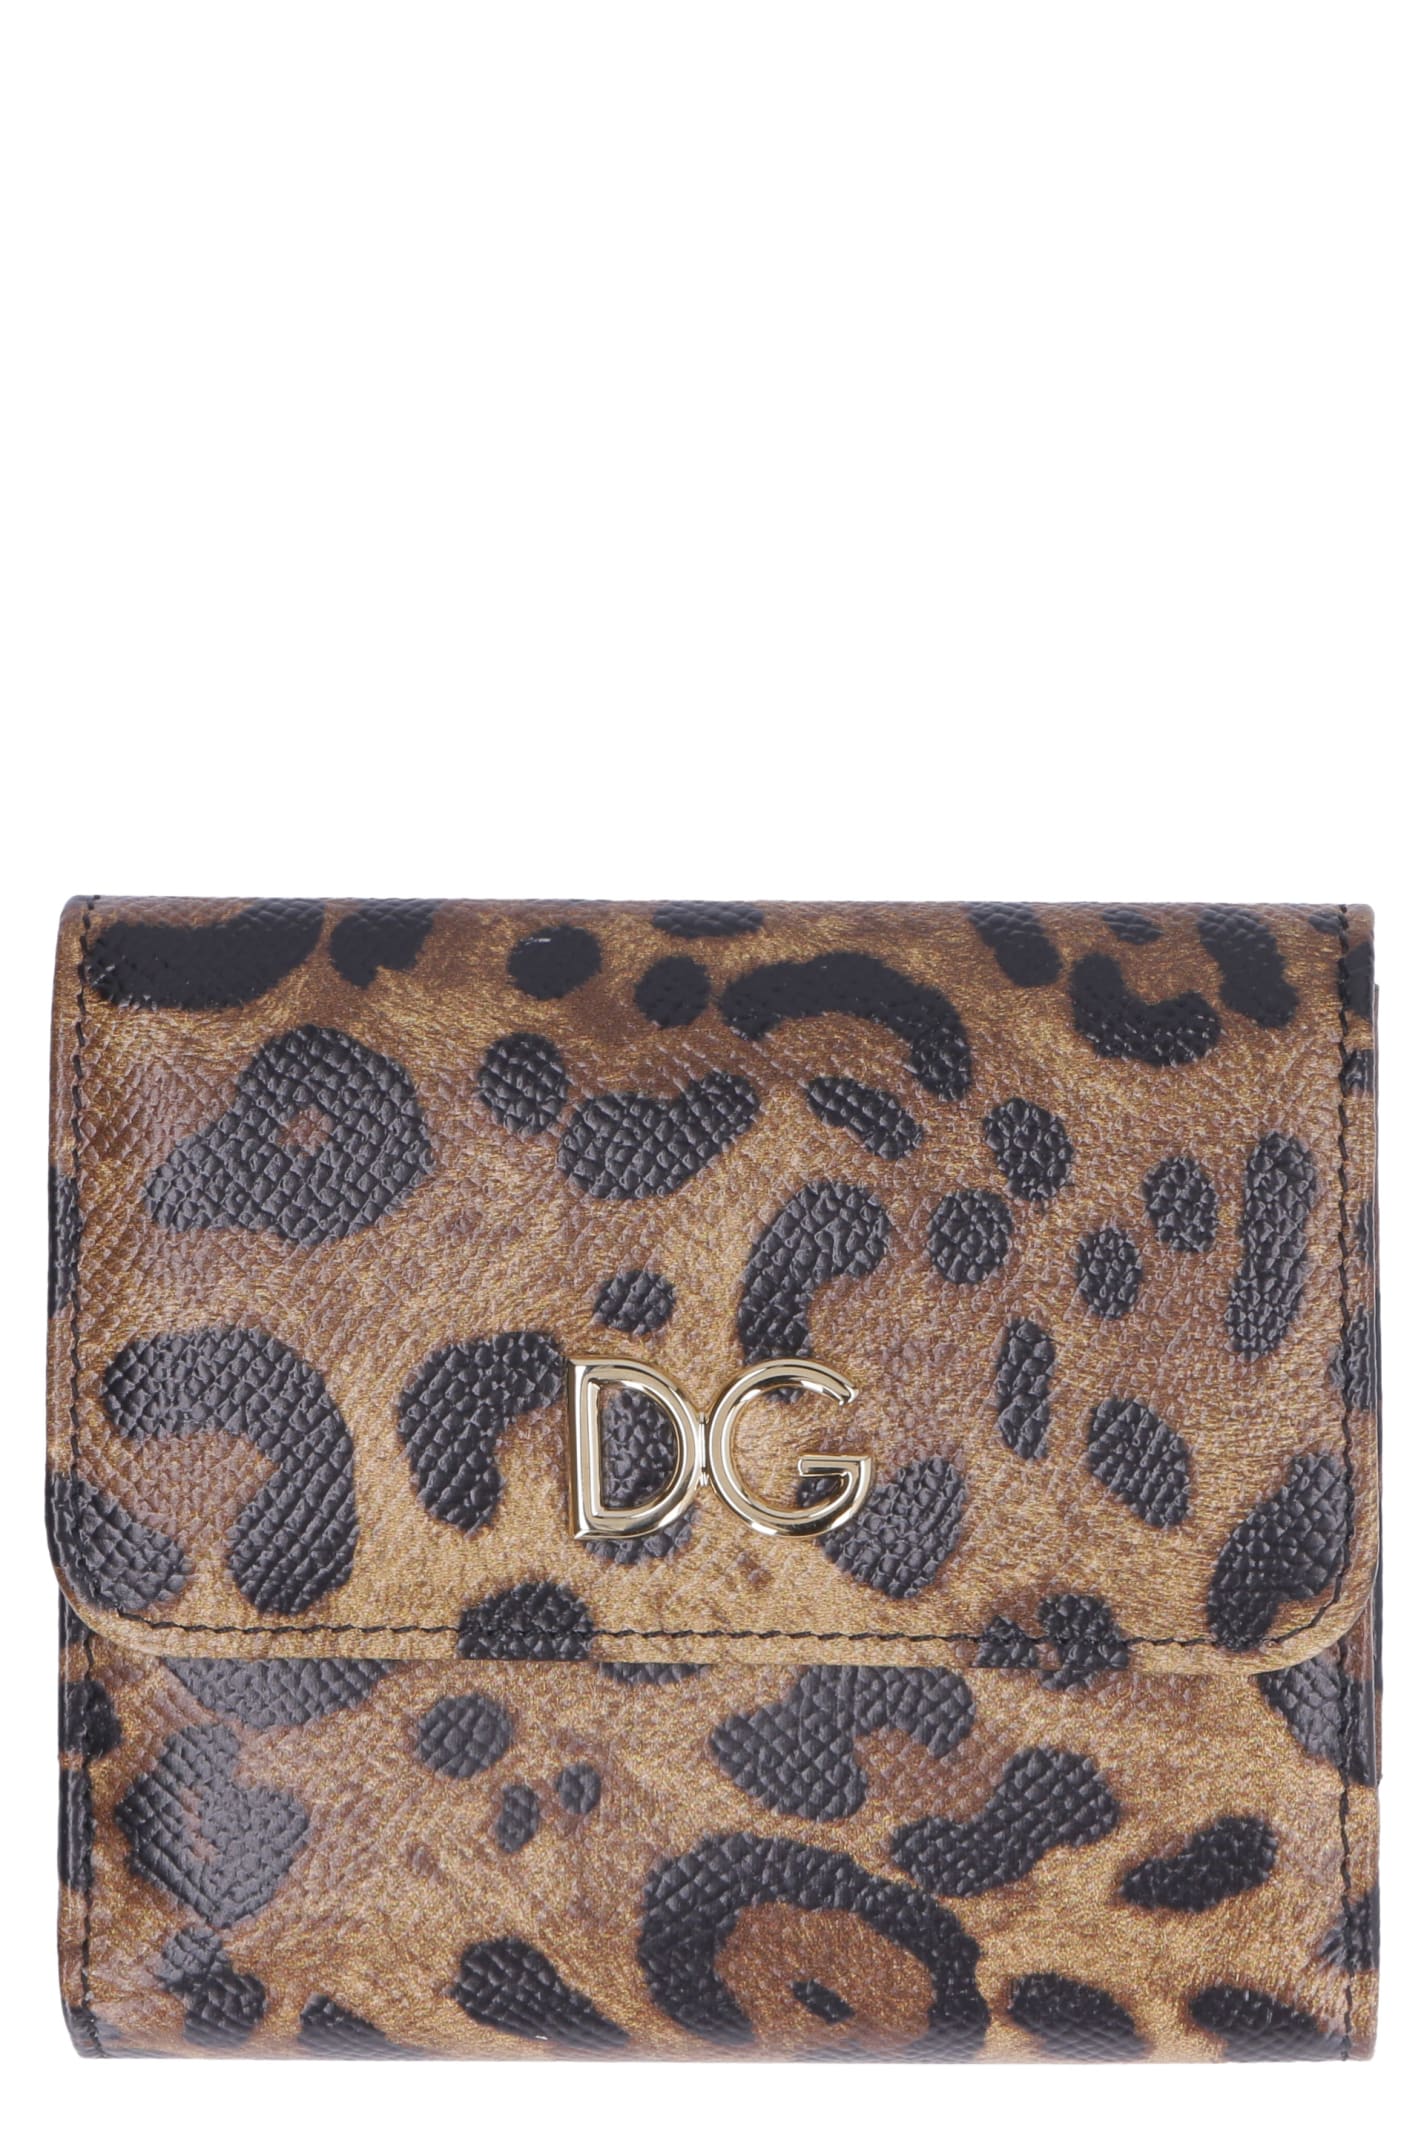 Dolce & Gabbana Leopard Print Leather French-flap Wallet